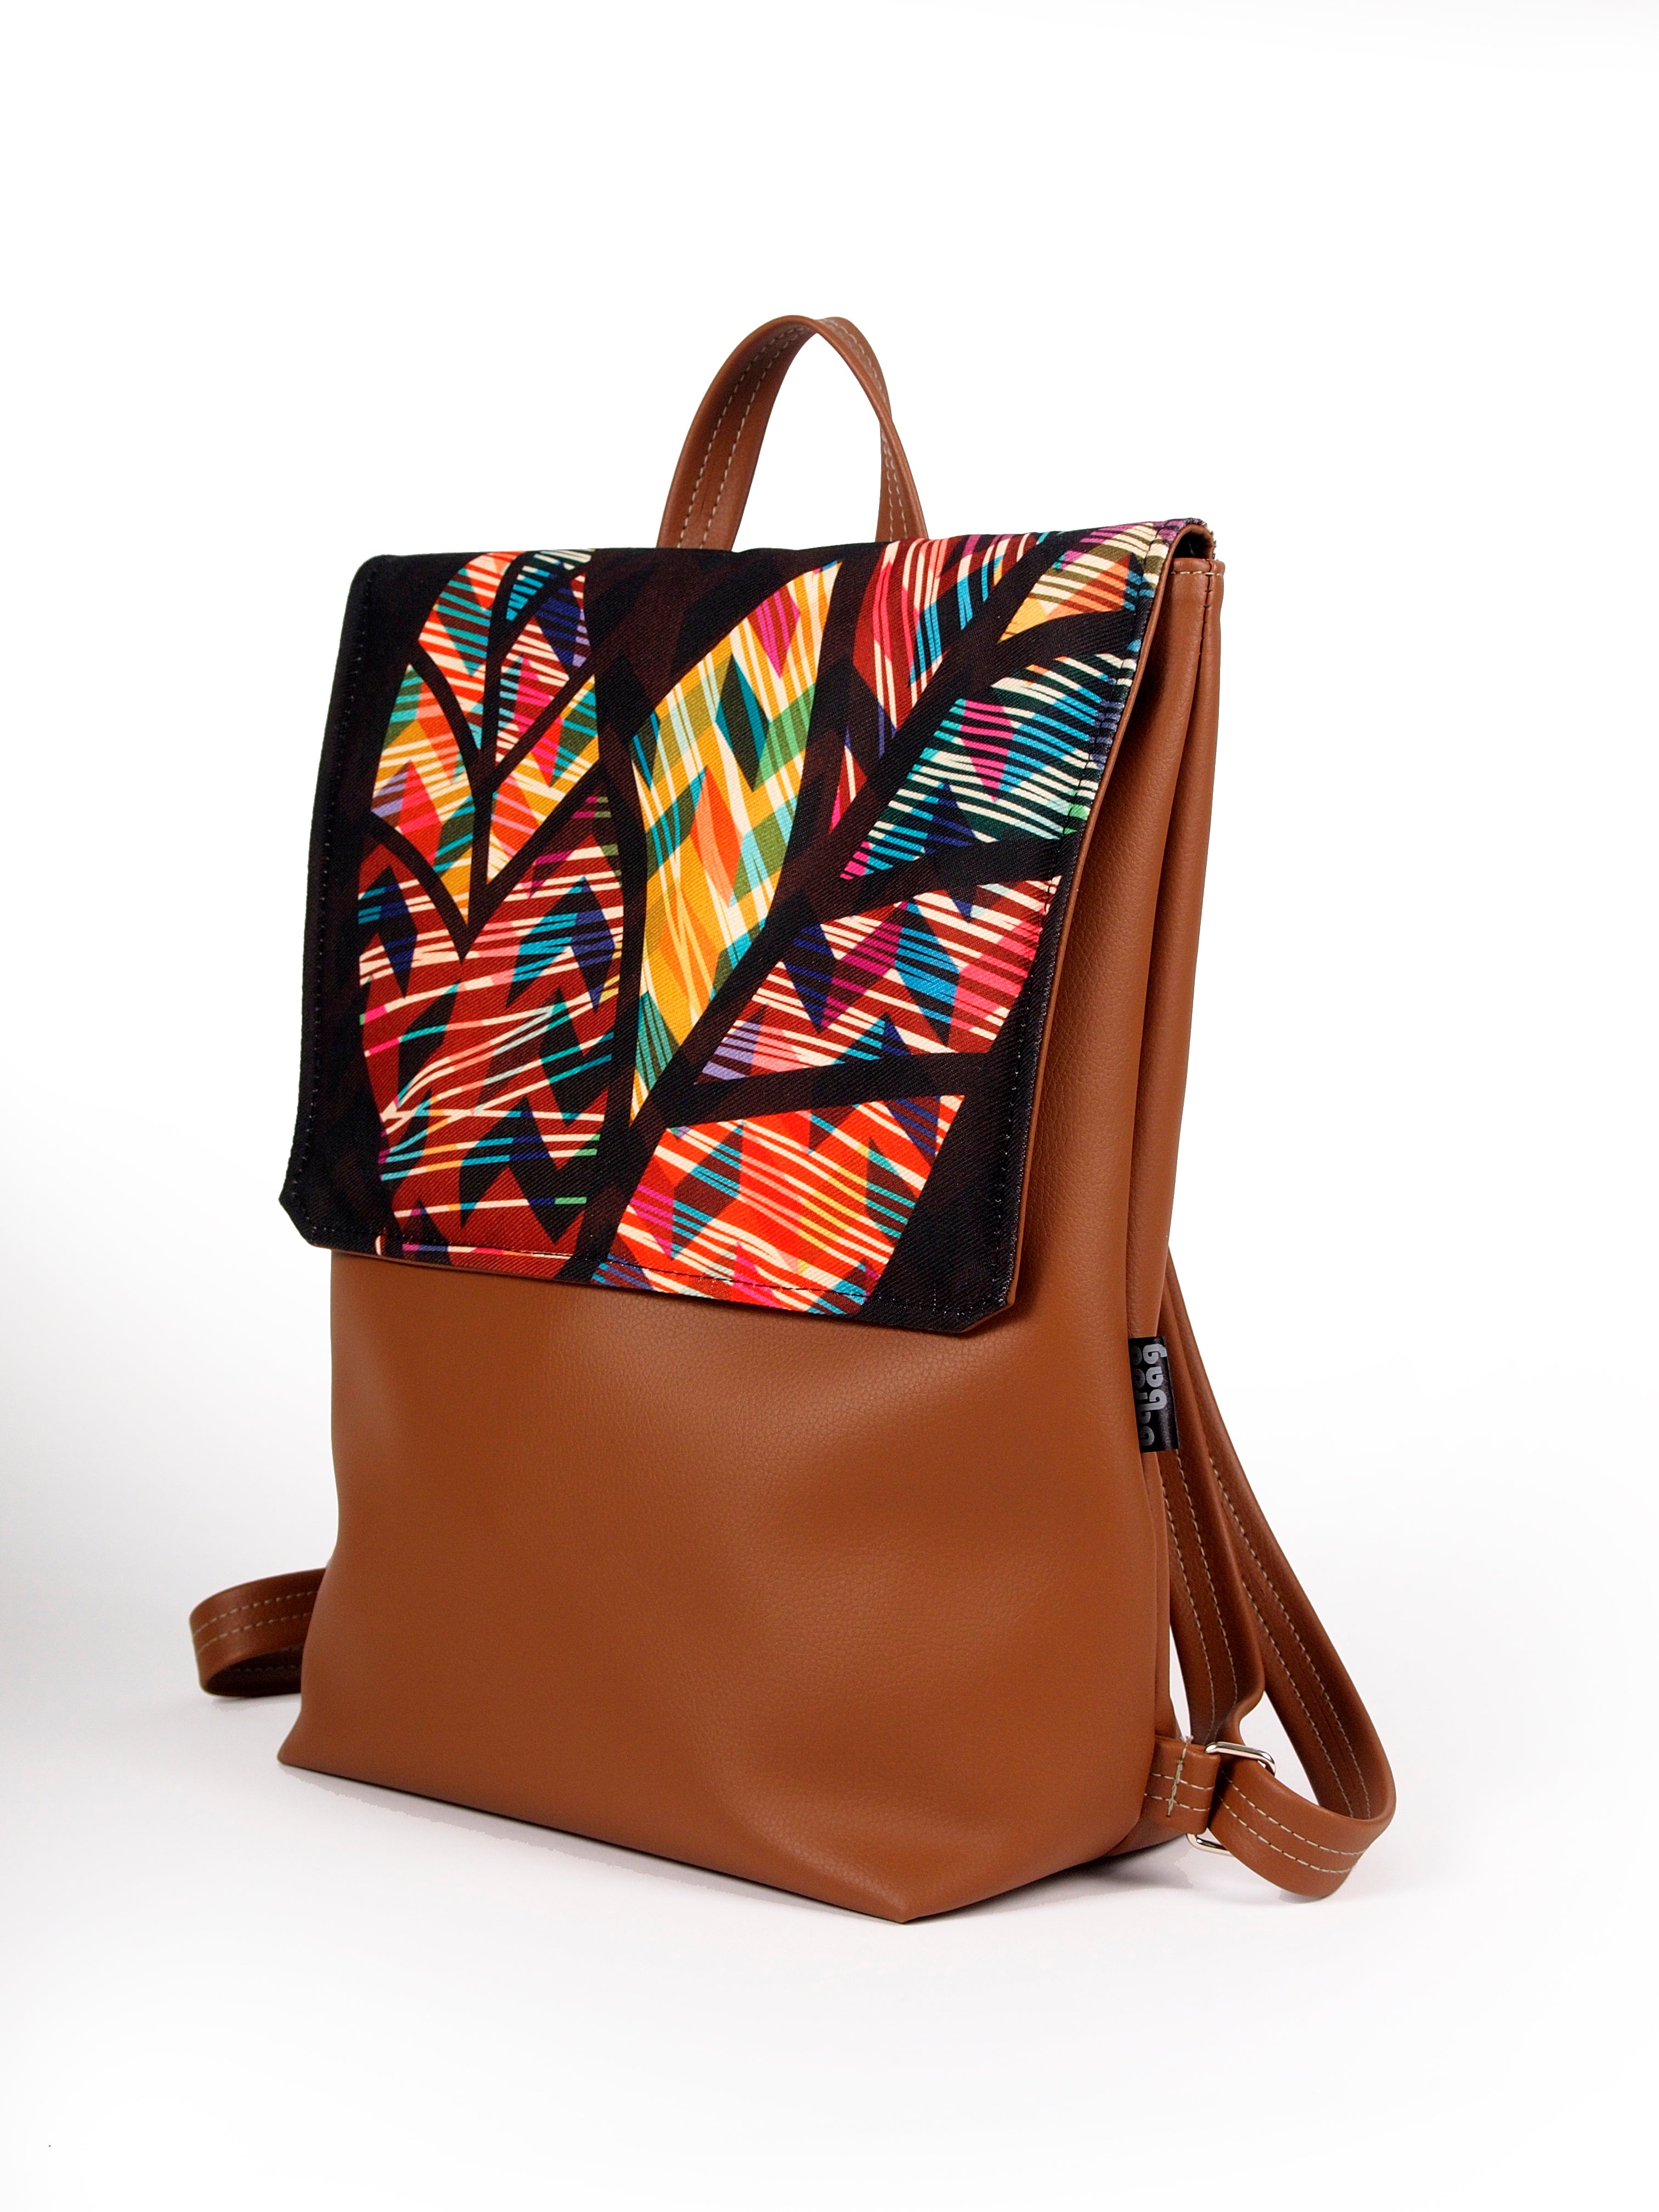 Bardo backpack large - One whole - Premium backpack large from BARDO ART WORKS - Just lvdark green, flowers, forest, gift, handemade, lotos, nature, painted patterns, red, tablet, urban style, vegan leather, woman85.00! Shop now at BARDO ART WORKS